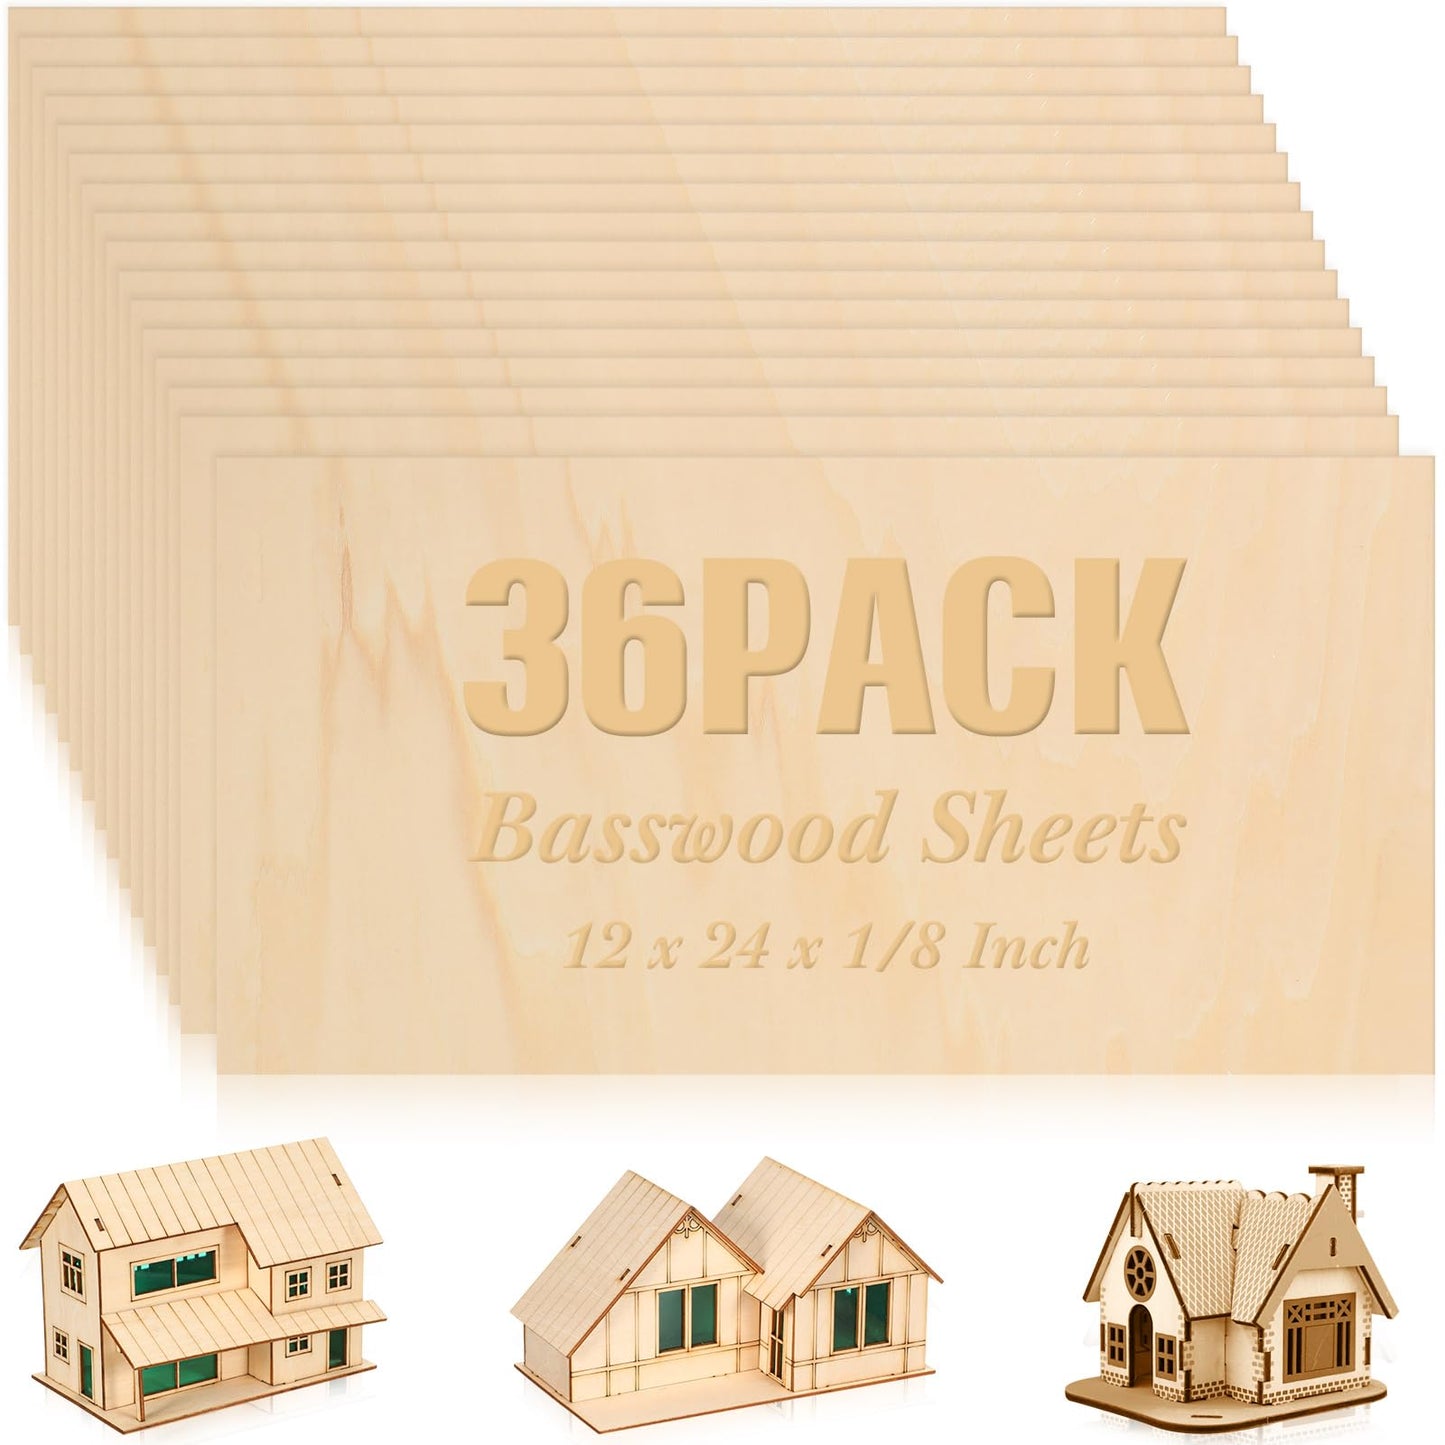 36 Pack Basswood Sheets Plywood Board 1/8 Inch Unfinished Wood Boards for Crafts for DIY Laser Projects Architectural Model Making Mini House